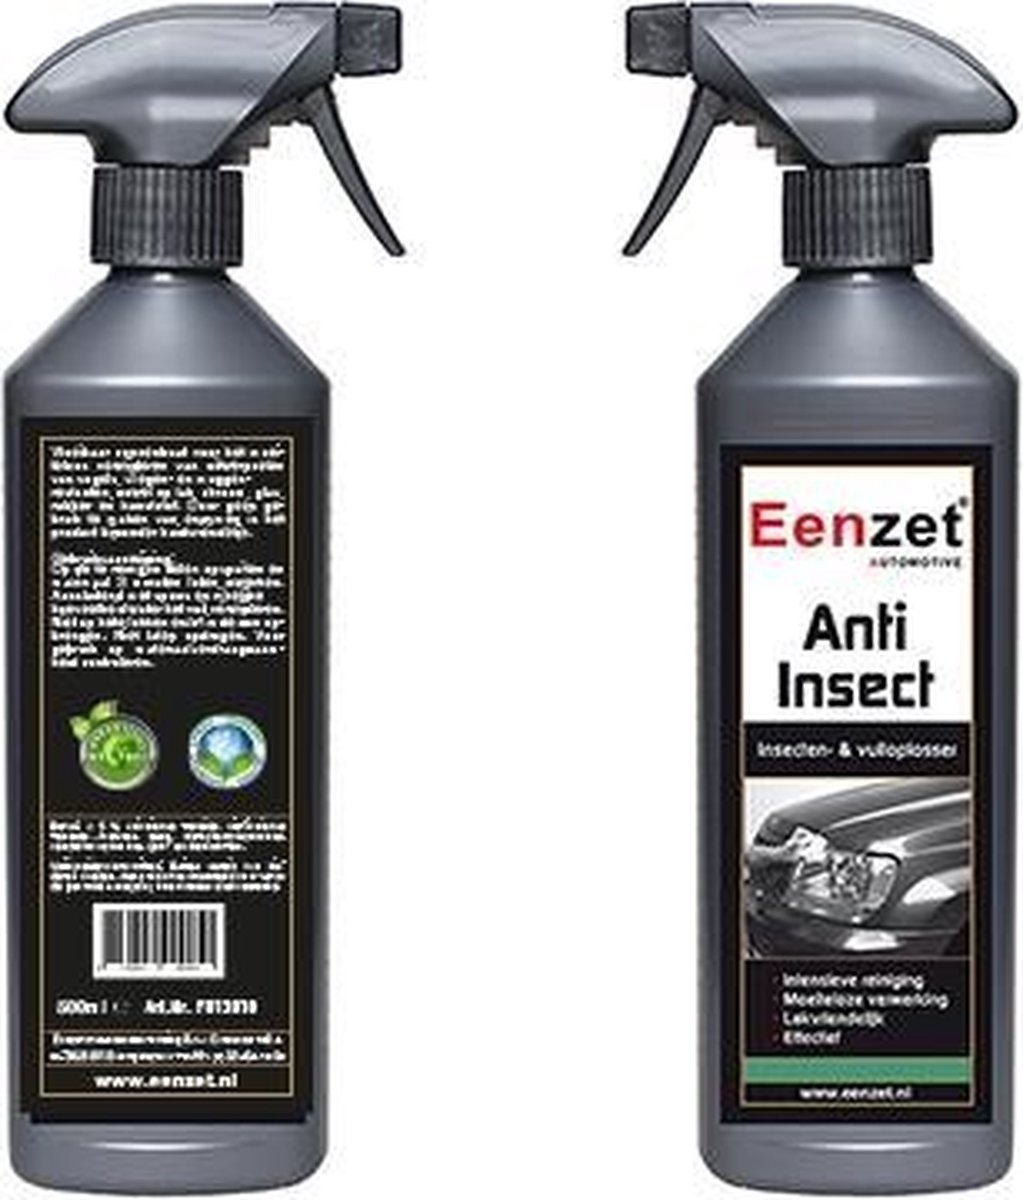 Anti-insect